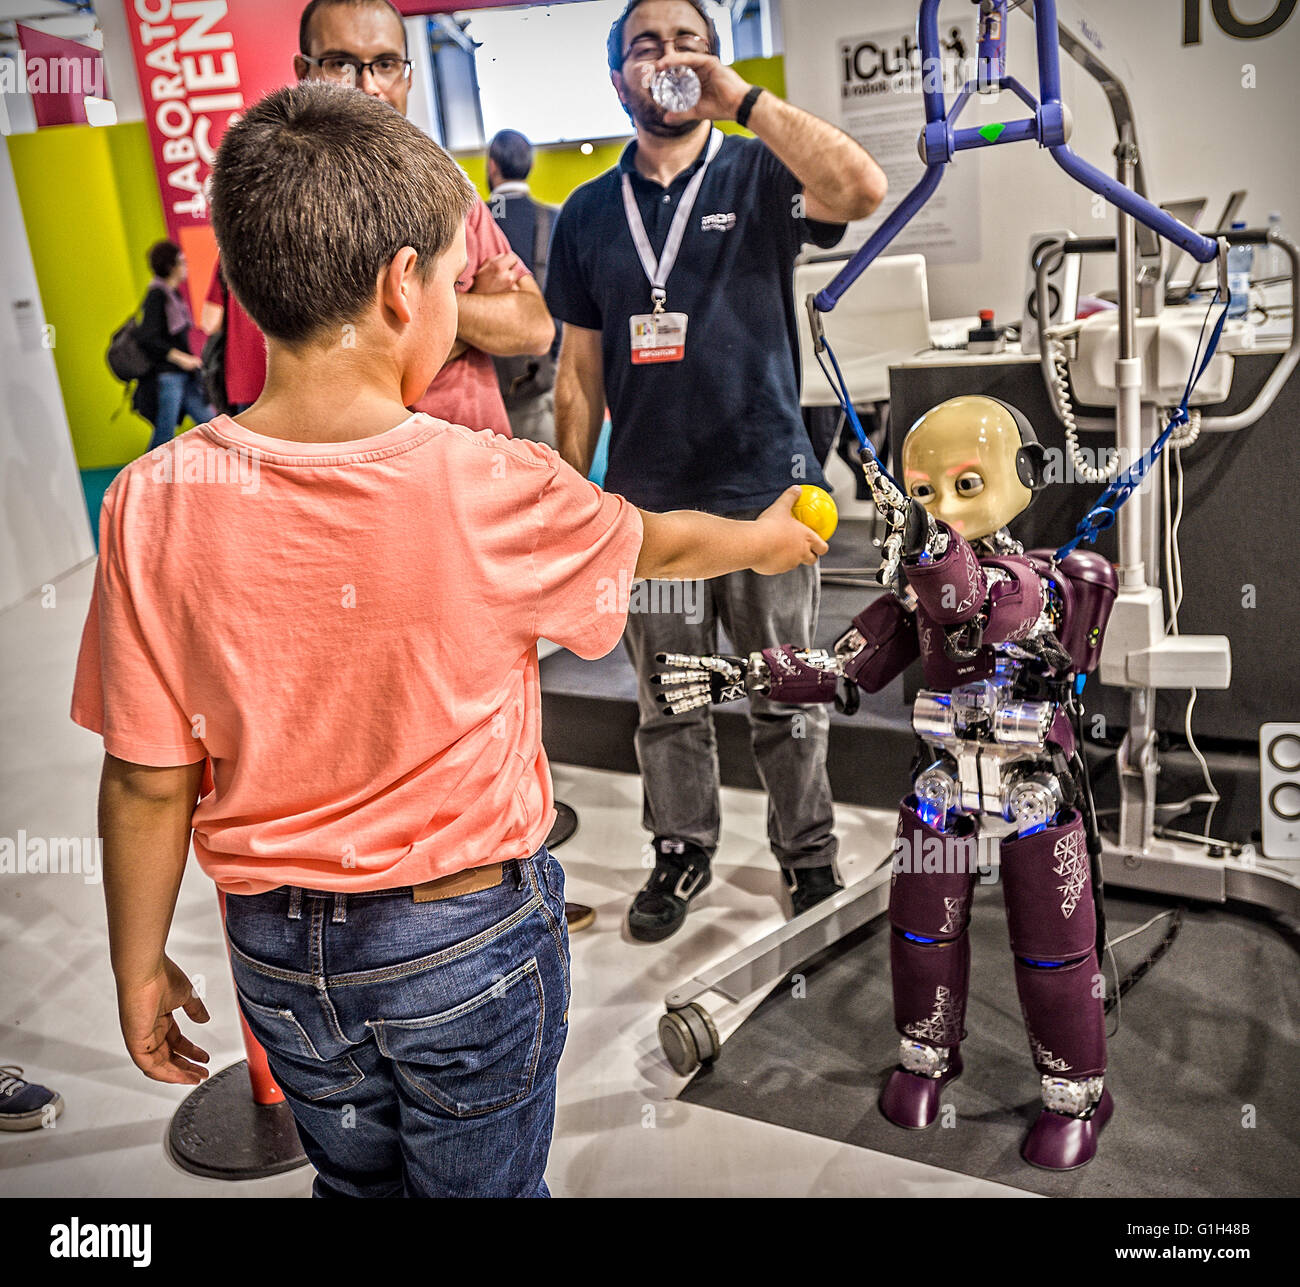 Turin, Italy. 15th May, 2016. XXIX International Book Fair -Children interact with the robot Icub Credit:  Realy Easy Star/Alamy Live News Stock Photo